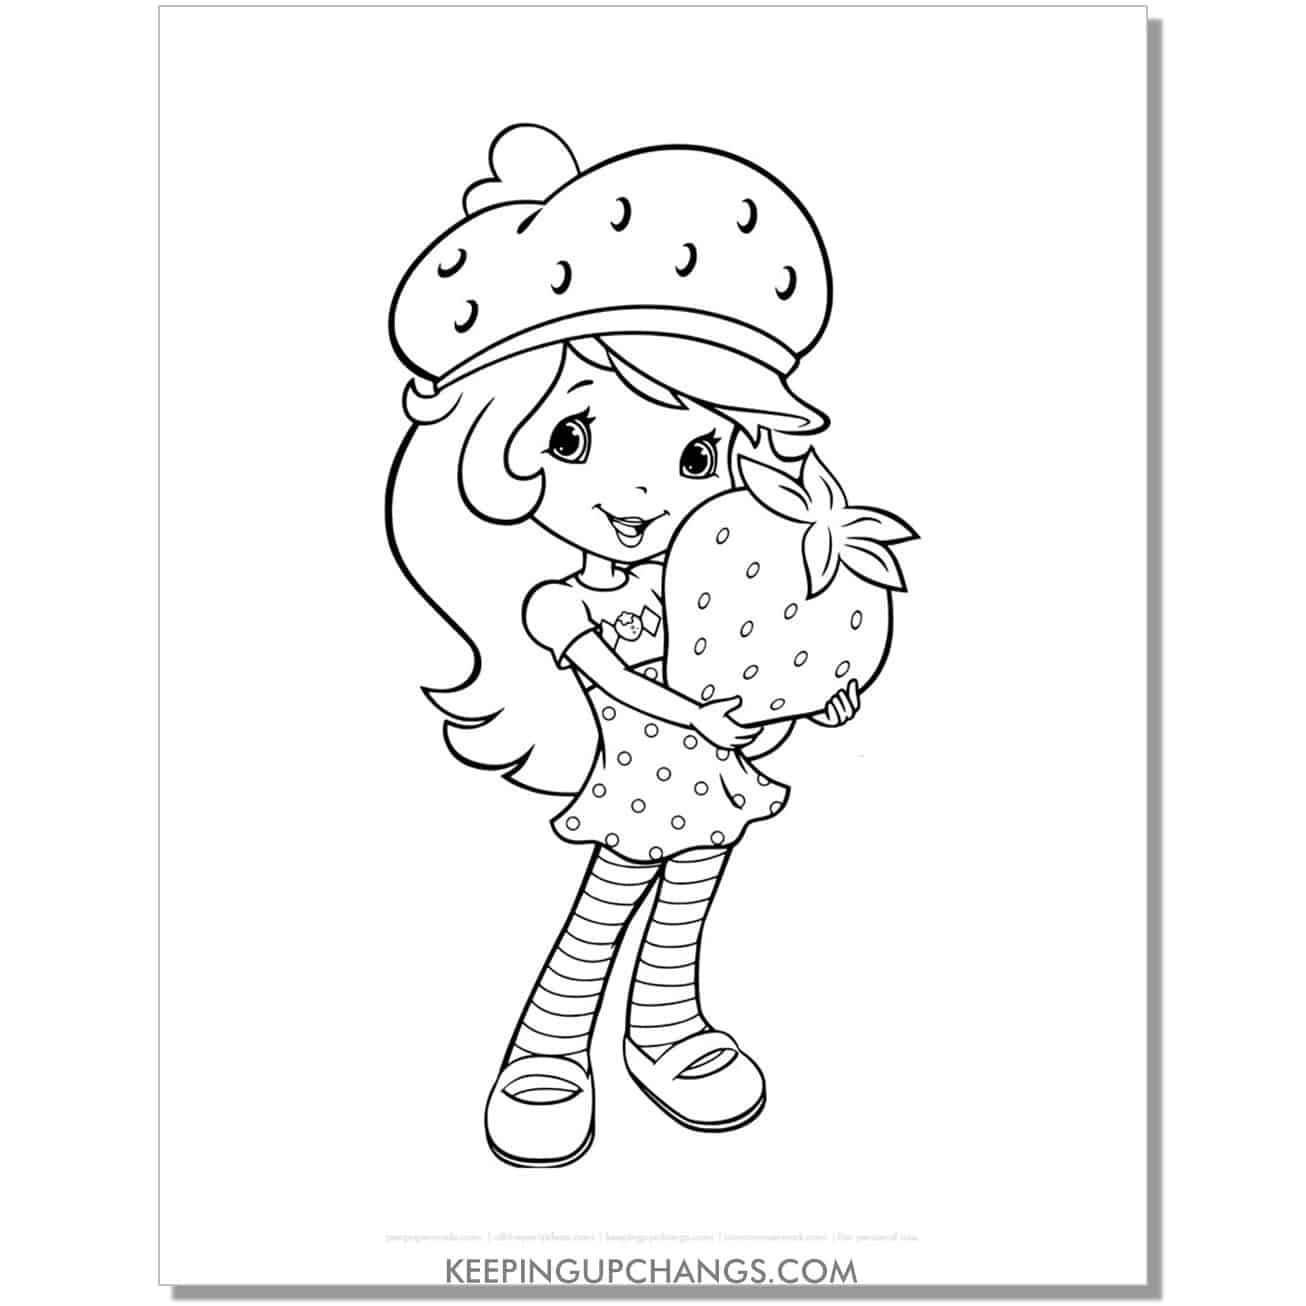 free strawberry shortcake holding large berry coloring page, sheet.